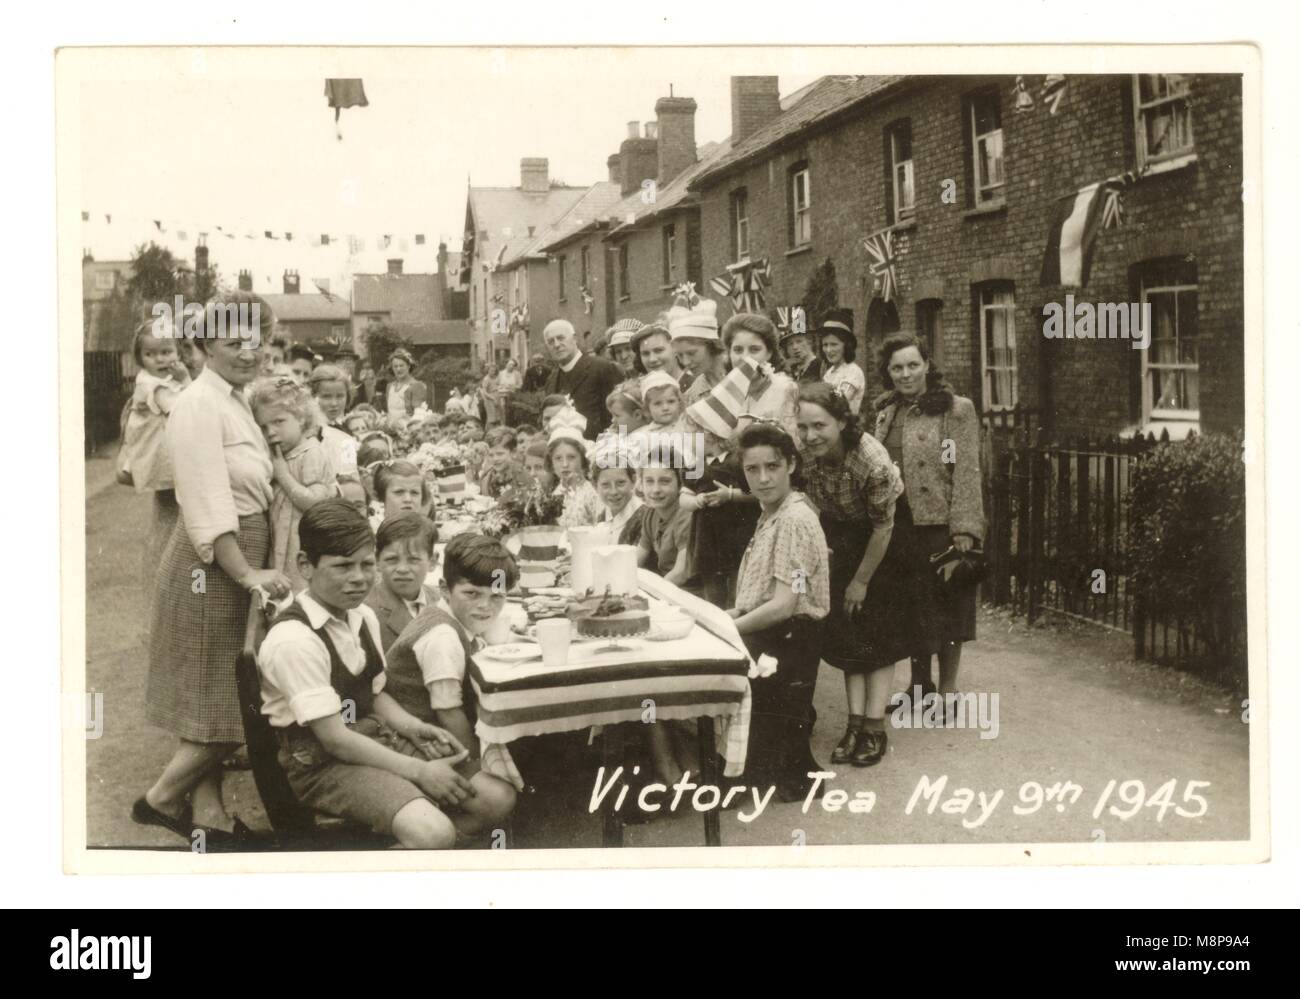 Original WW2 era postcard Victory tea street party, May 9th 1945,to celebrate the ending of 2nd World War, Stanstead Abbbotts, East Hertfordshire, England, U.K. Stock Photo